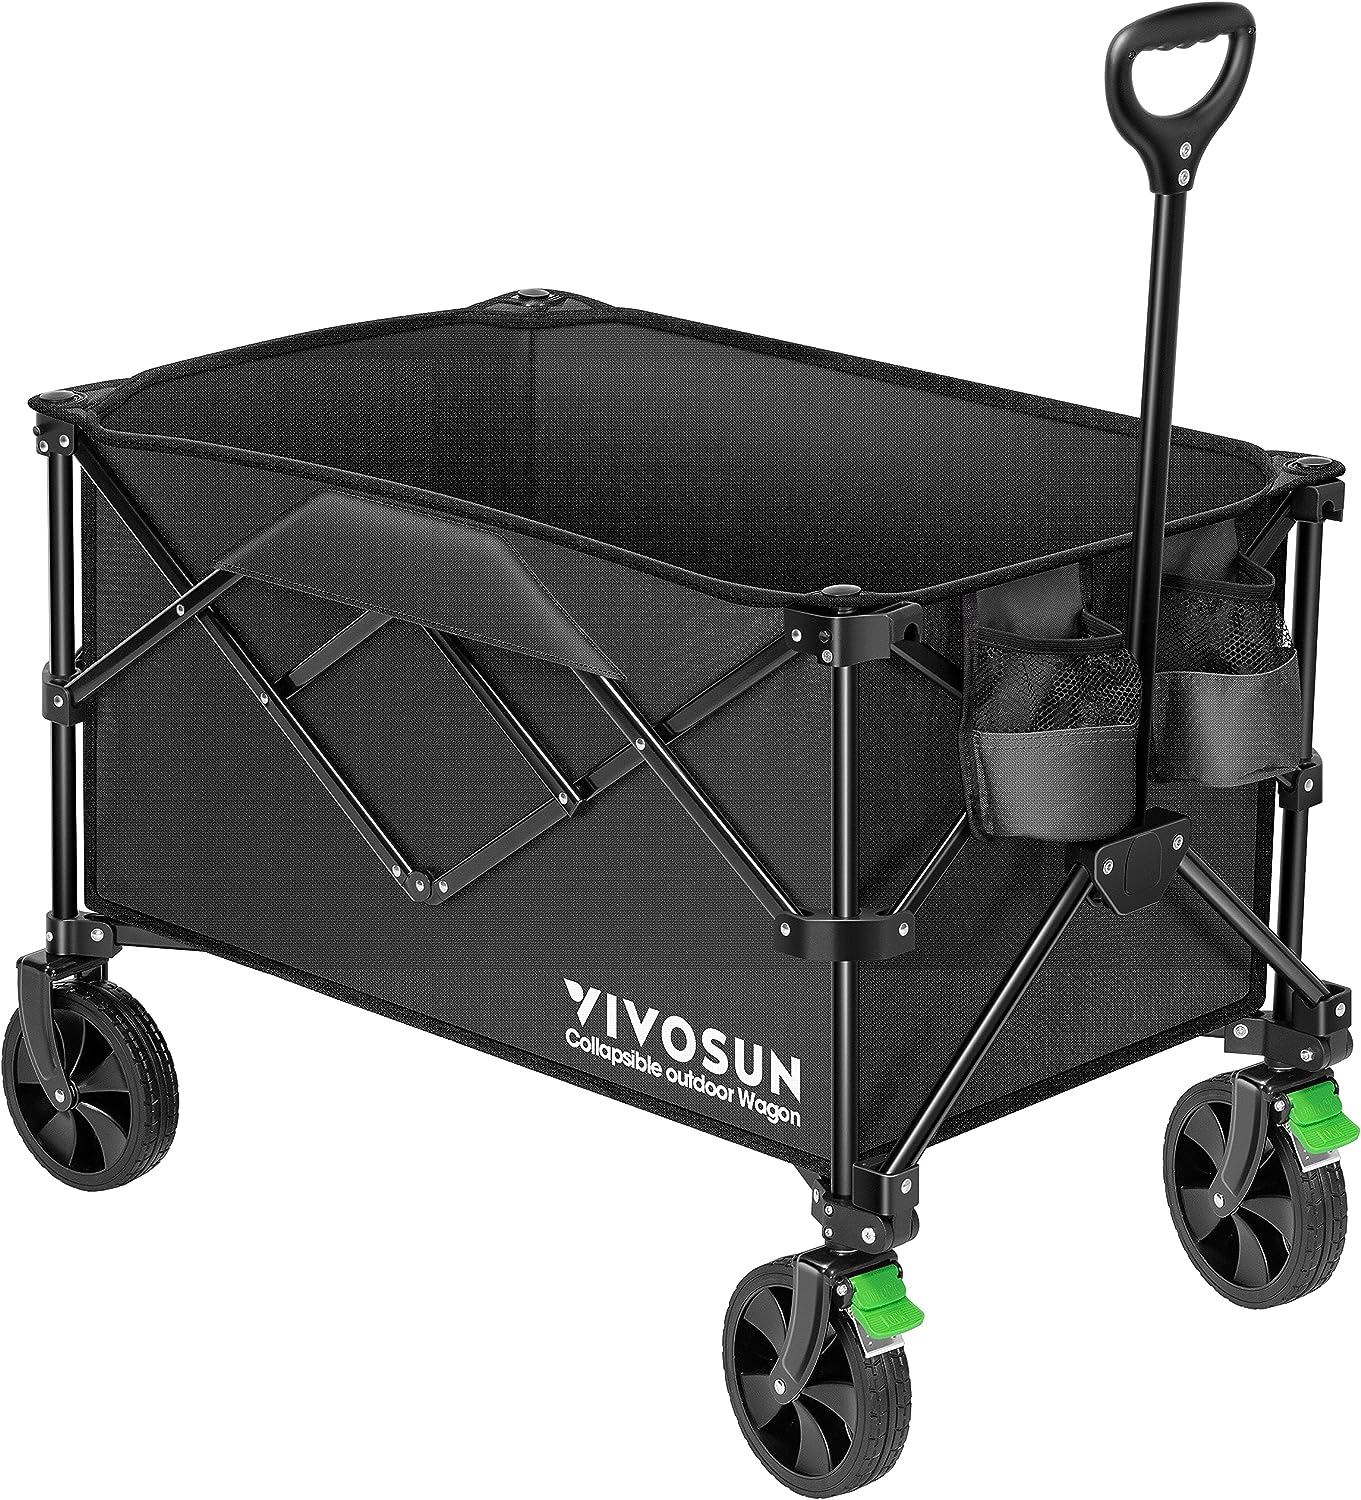 VIVOSUN Collapsible Folding Wagon, Outdoor Utility with Silent Universal Wheels, Adjustable Handle, Cup Holders & Side Pockets - image 1 of 8